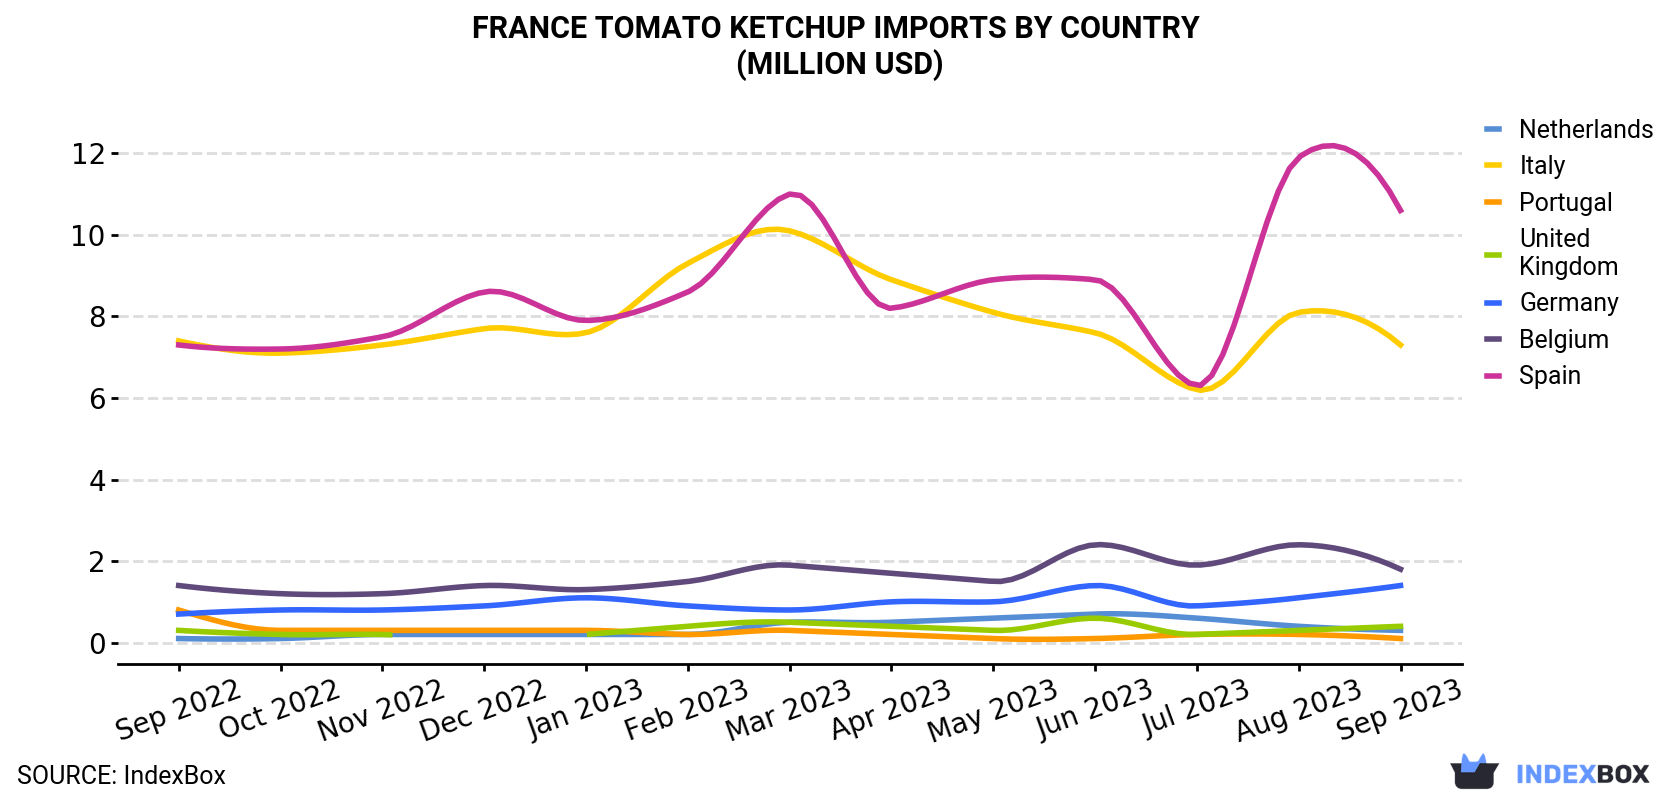 France Tomato Ketchup Imports By Country (Million USD)